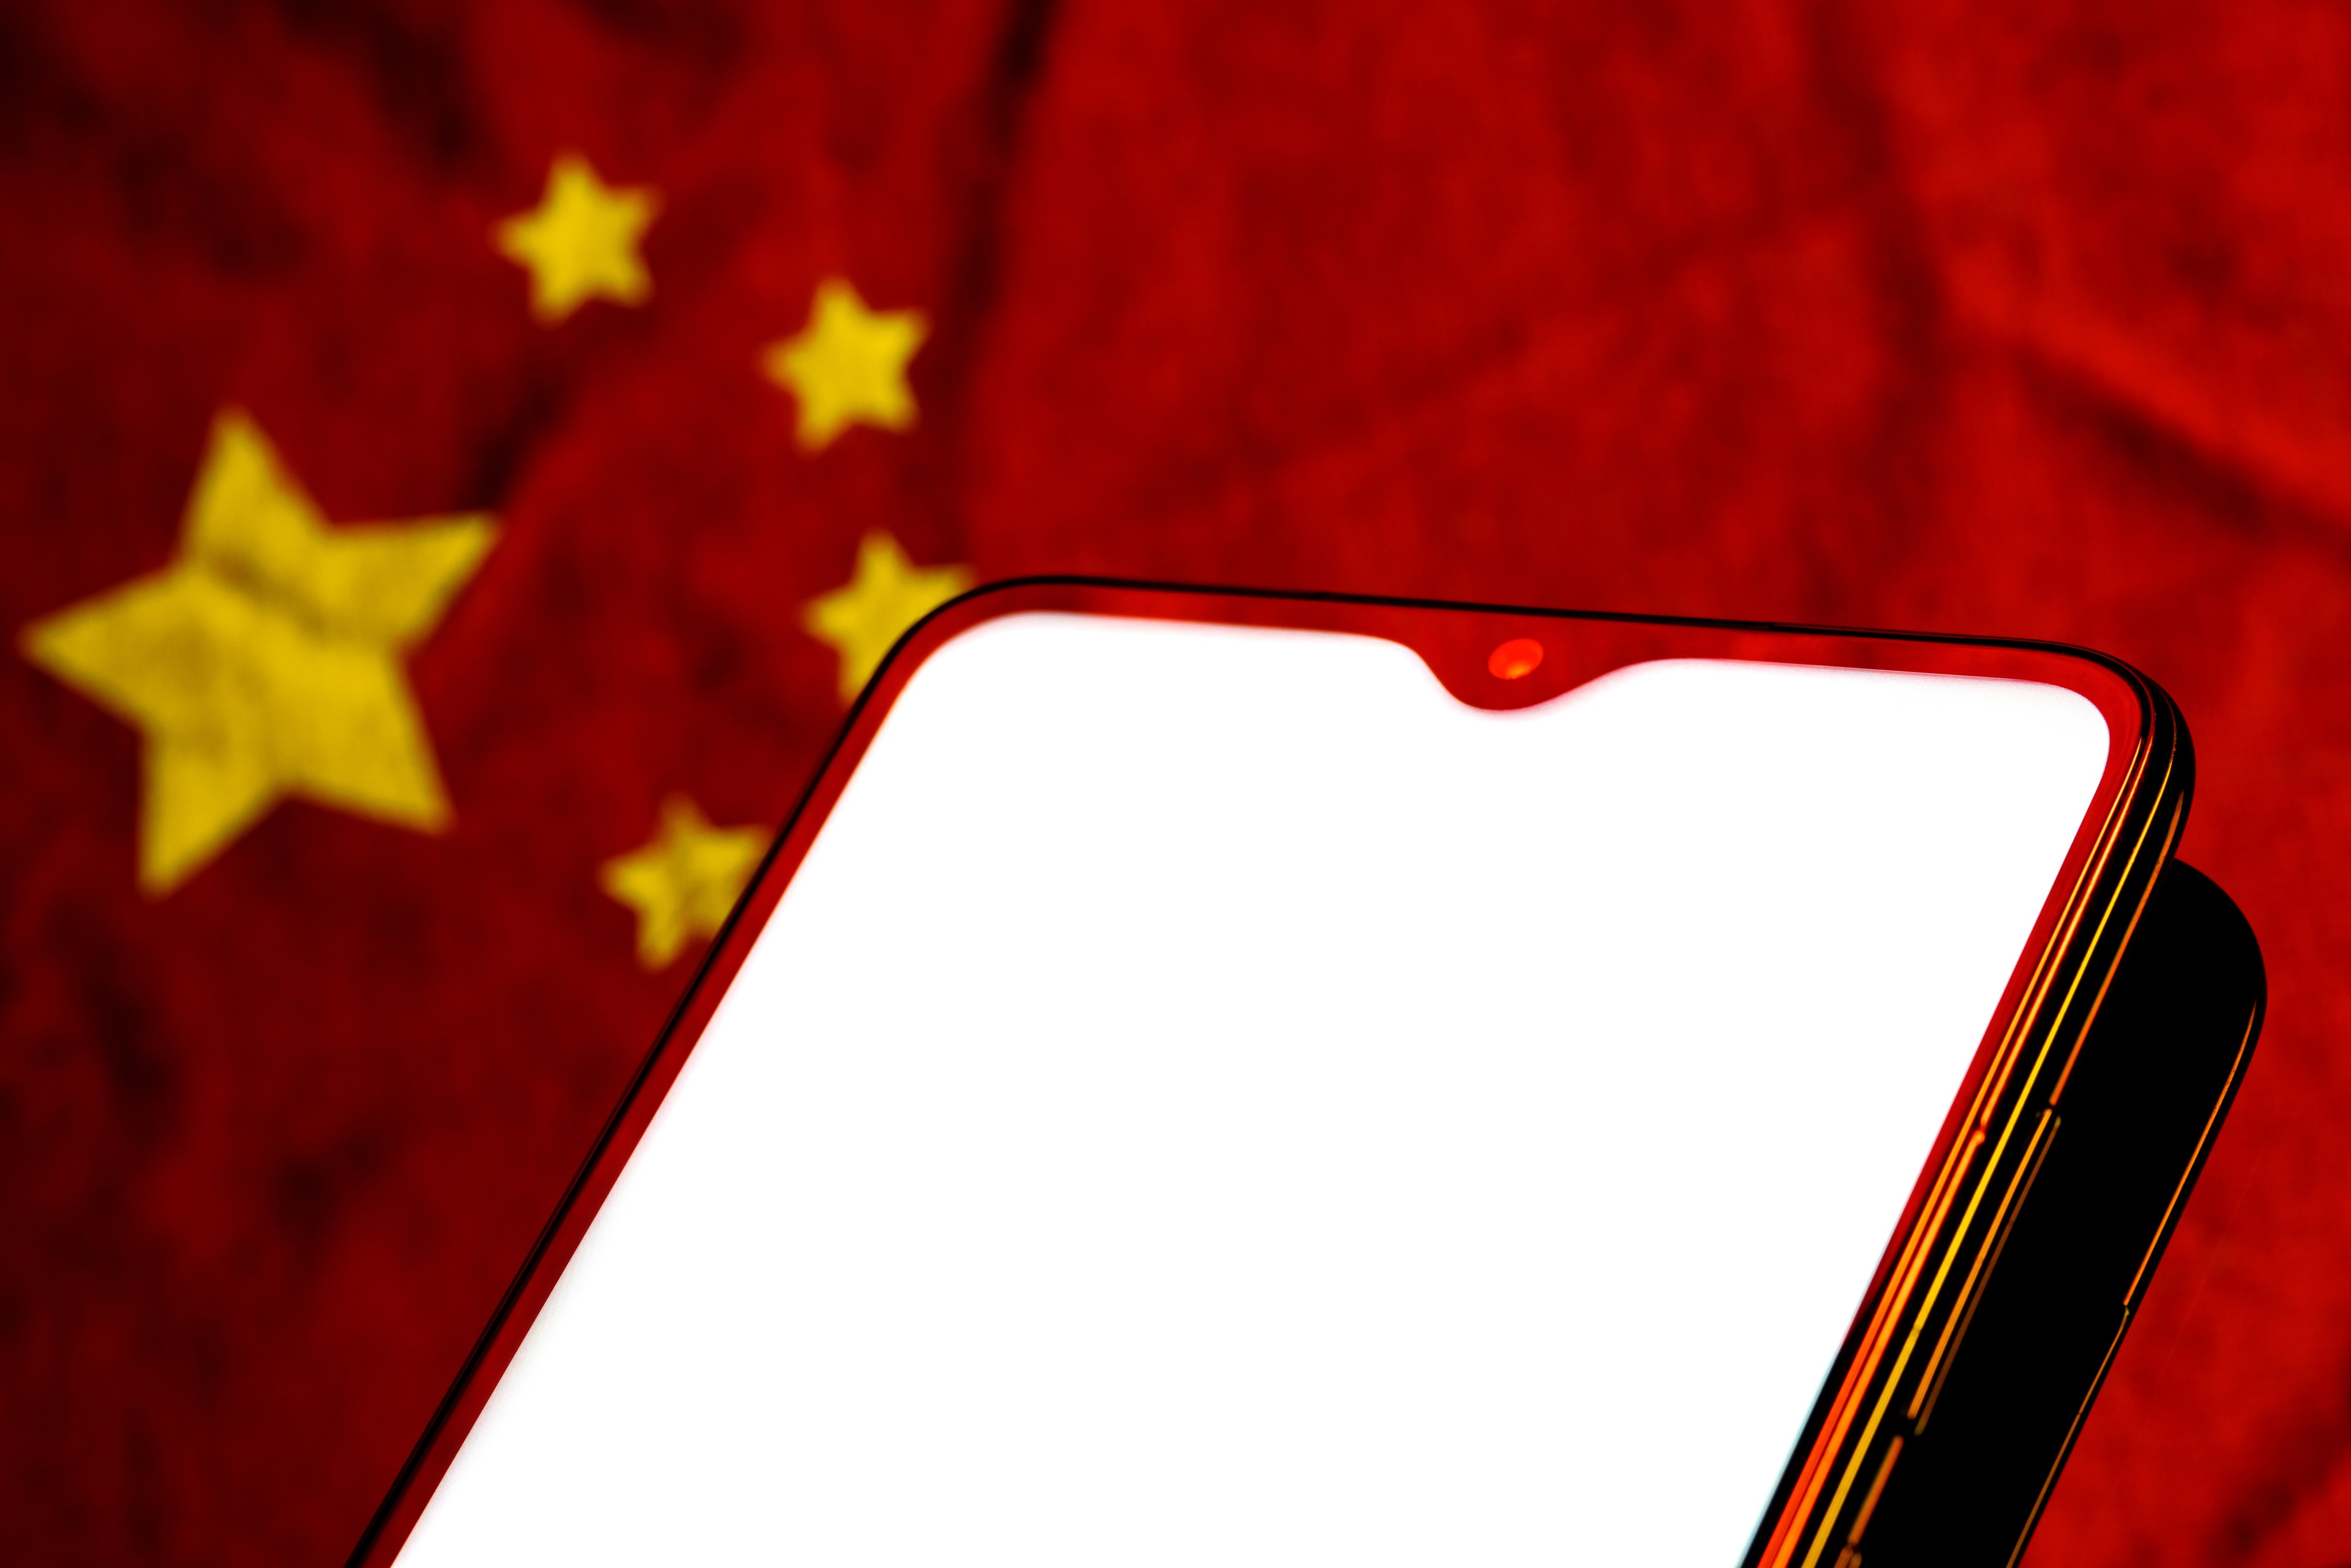 China’s internet watchdog has announced its latest annual crackdown. Photo: Shutterstock Images